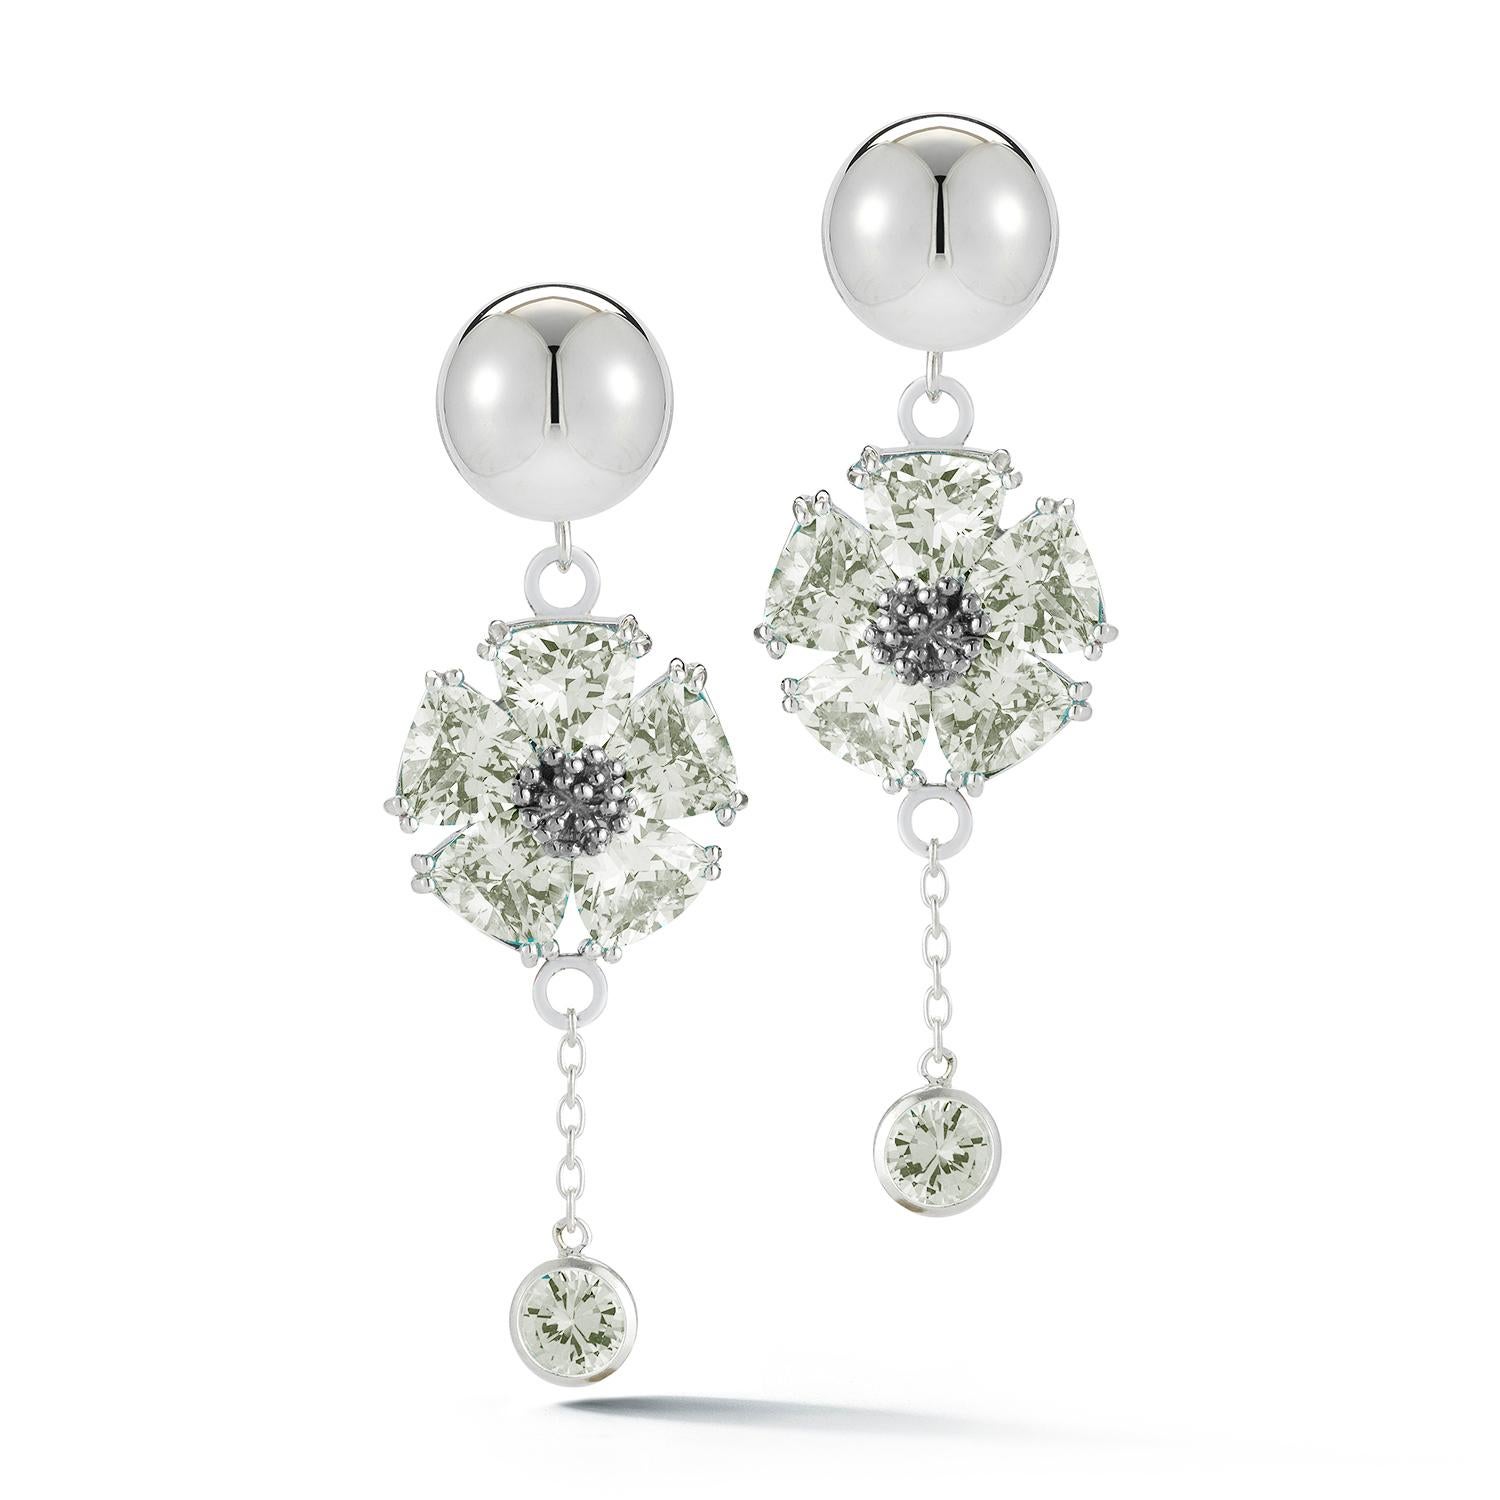 Designed in NYC

.925 Sterling Silver 2 x 20 mm White Sapphire Blossom Stone Bezel Drop Earrings. No matter the season, allow natural beauty to surround you wherever you go. Blossom stone bezel drop earrings:  

    Sterling silver 
    High-polish